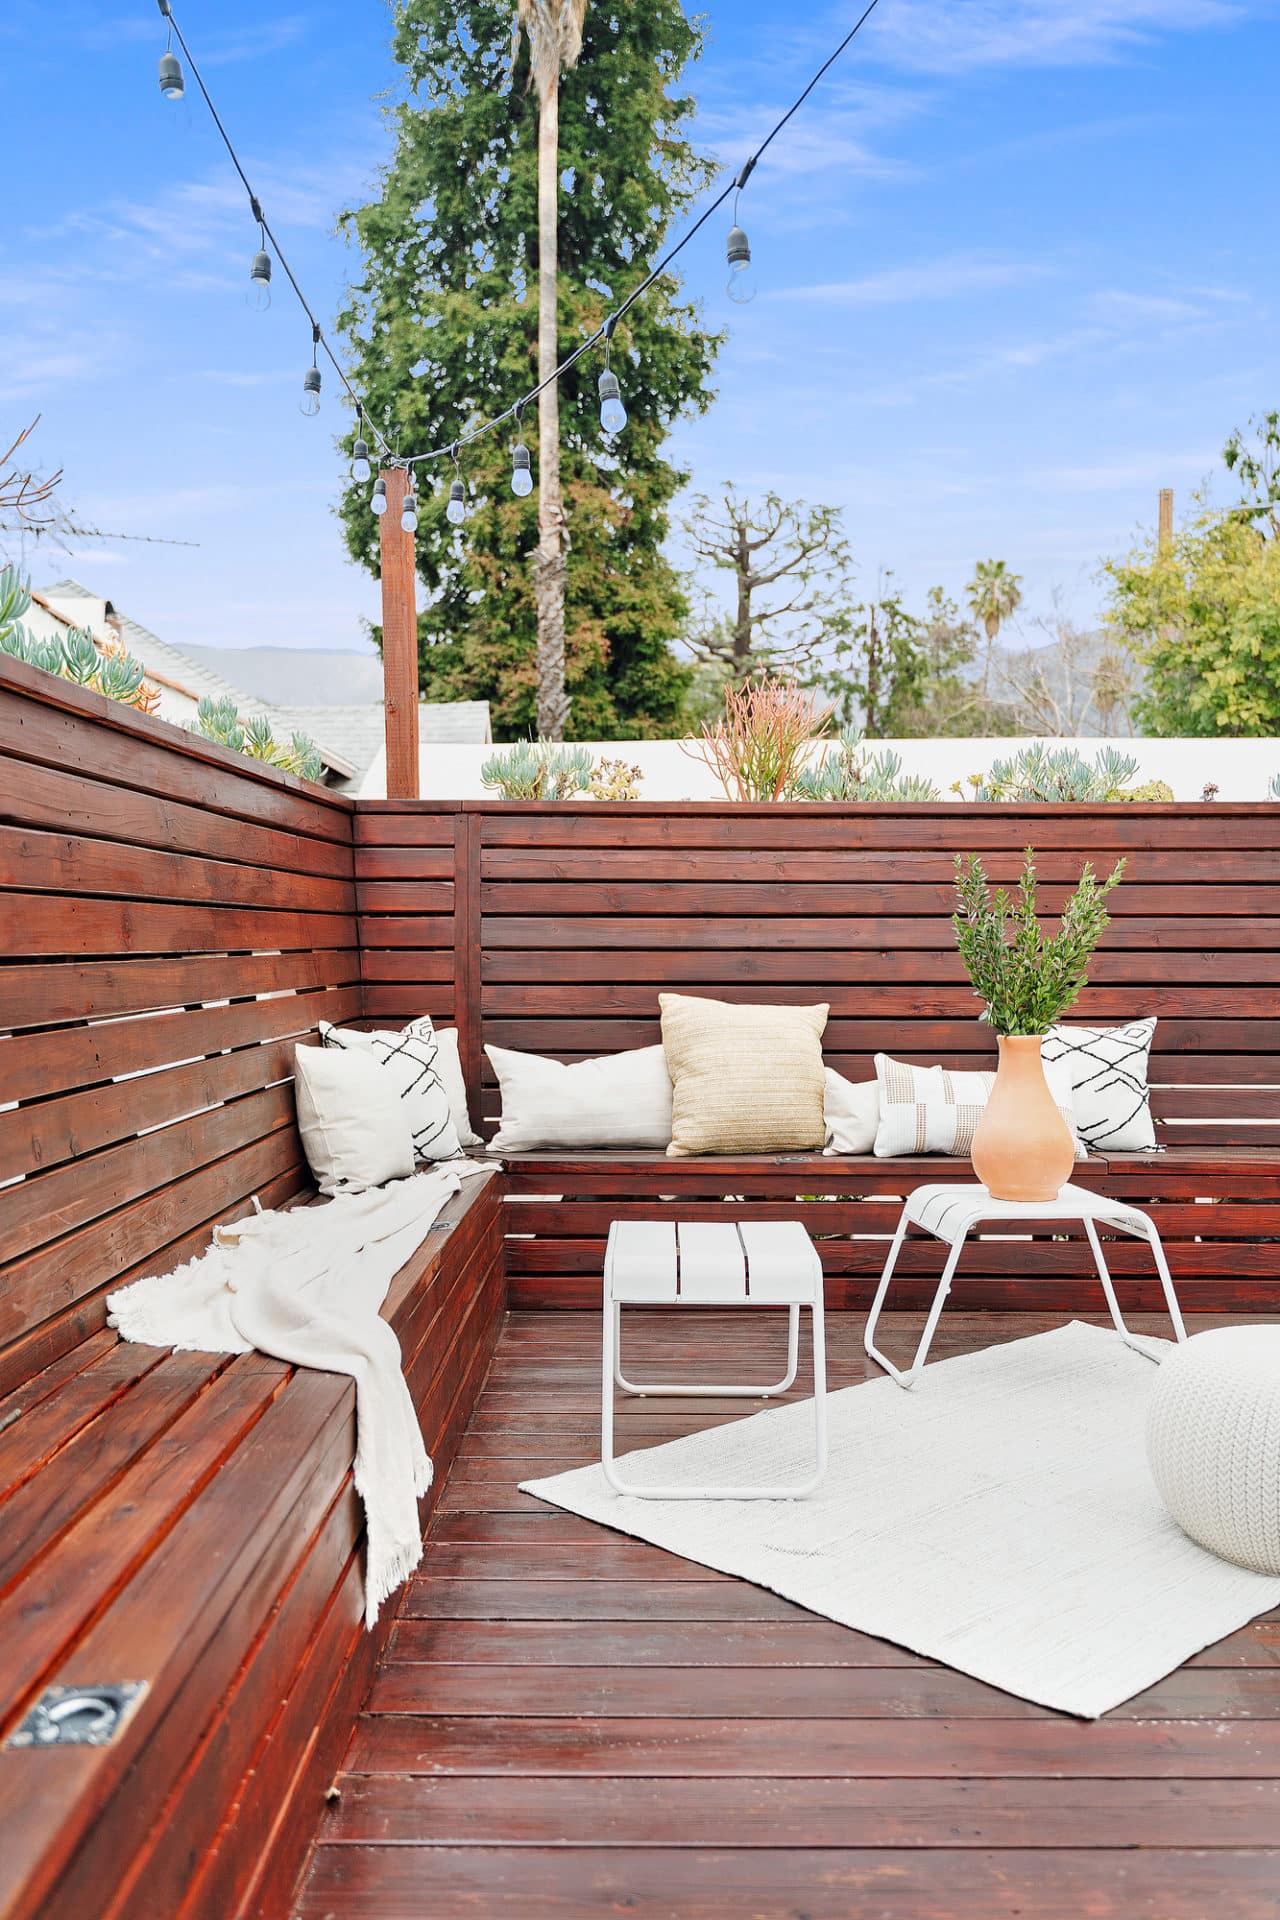 Original Character Meets Modern Flair in Altadena Spanish Bungalow sold ...